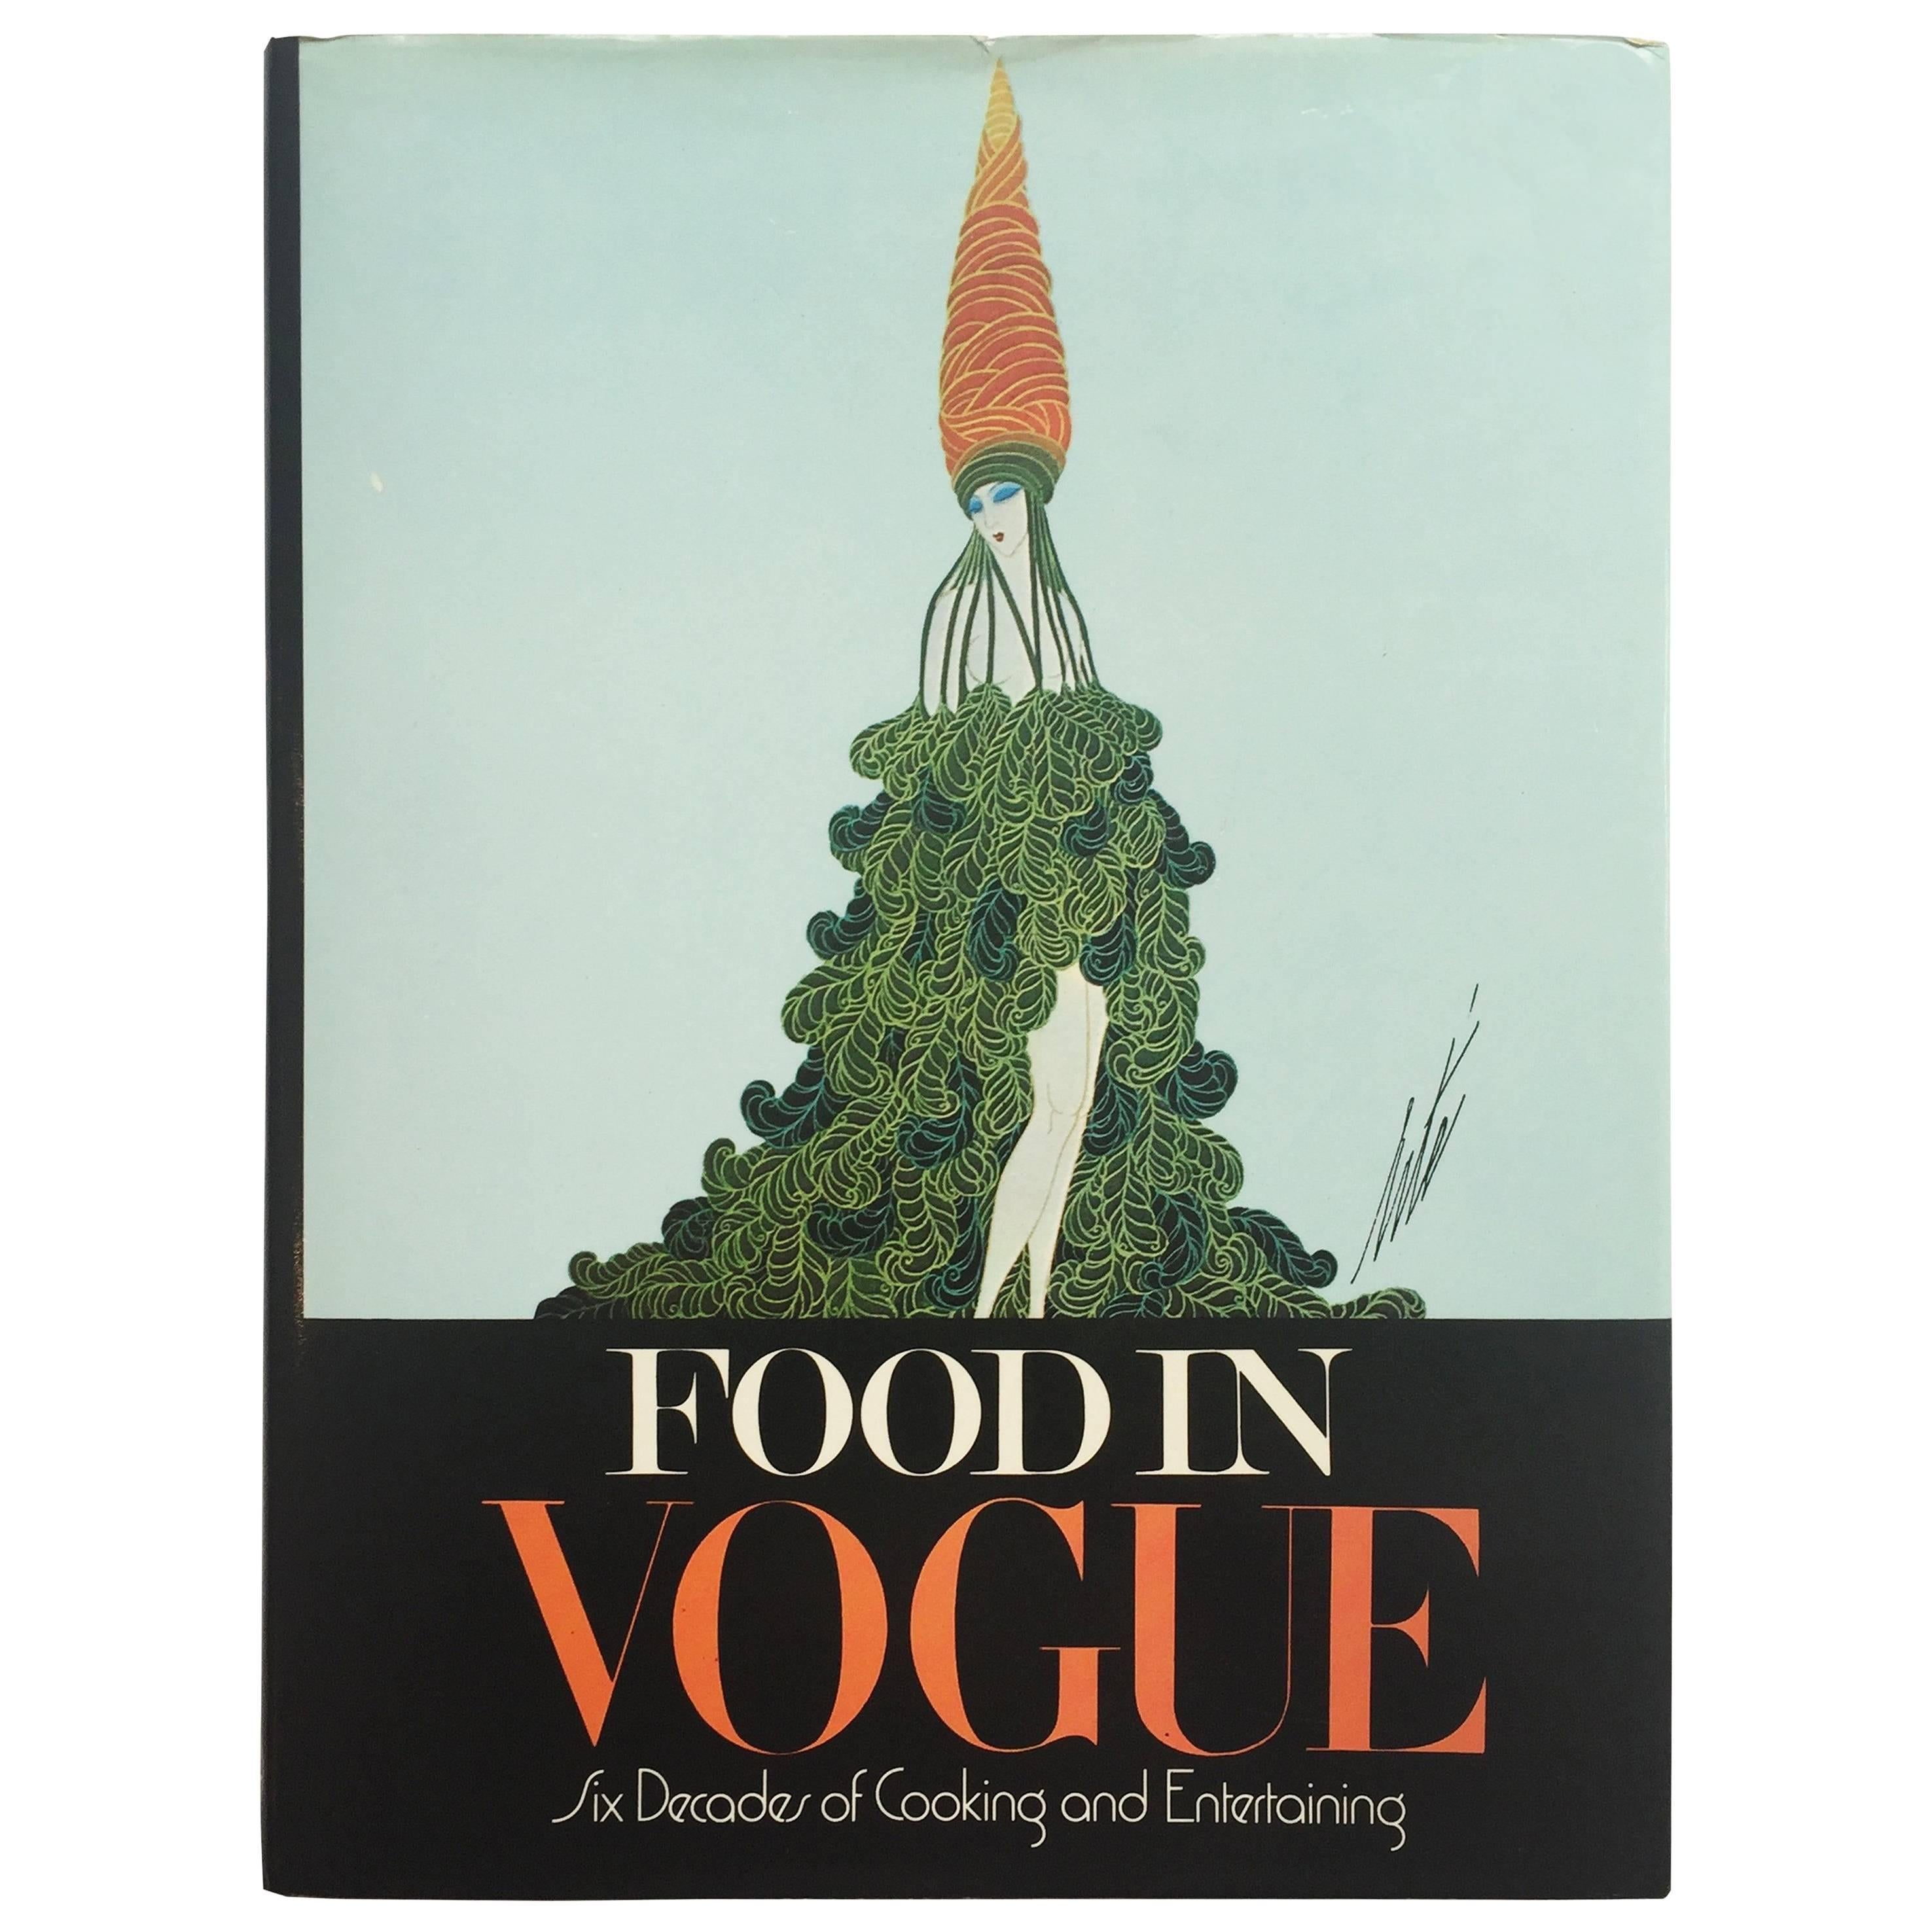 Food in Vogue, Six Decades of Cooking and Entertaining